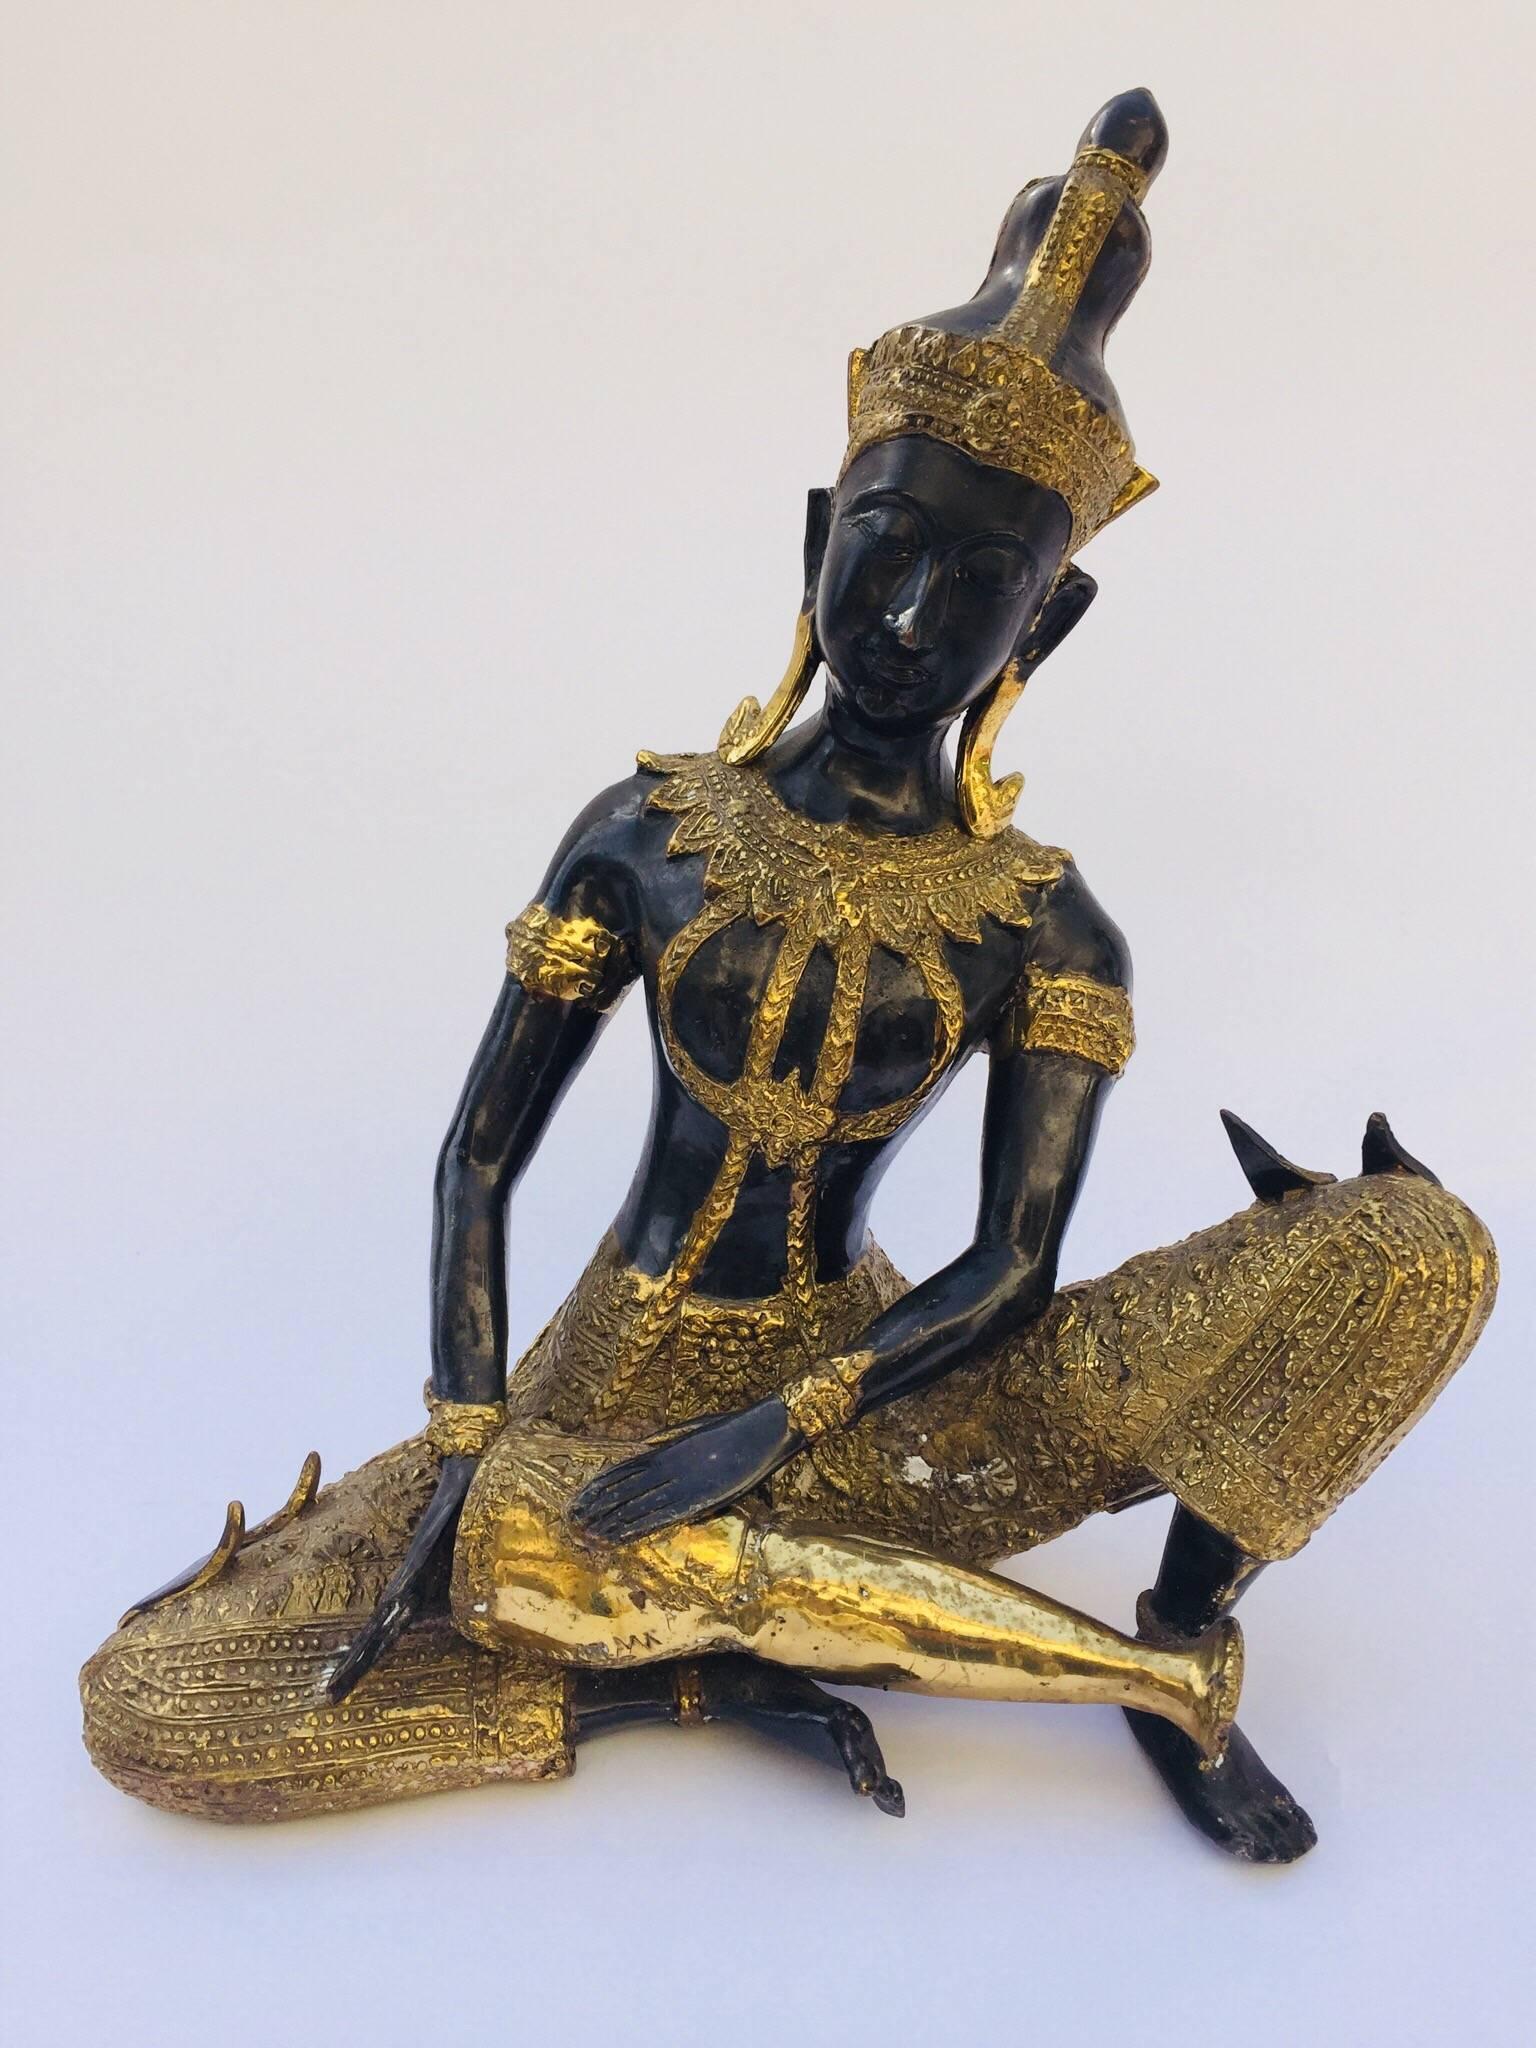 Asian bronze statue of Prince Pra Apai Manee playing a traditional Asian drum instrument. This bronze is black with the ceremonial costume and the jewelry adorned with gold leaf.
Very fine decorative Asian art work on cast bronze.
Measures: Height